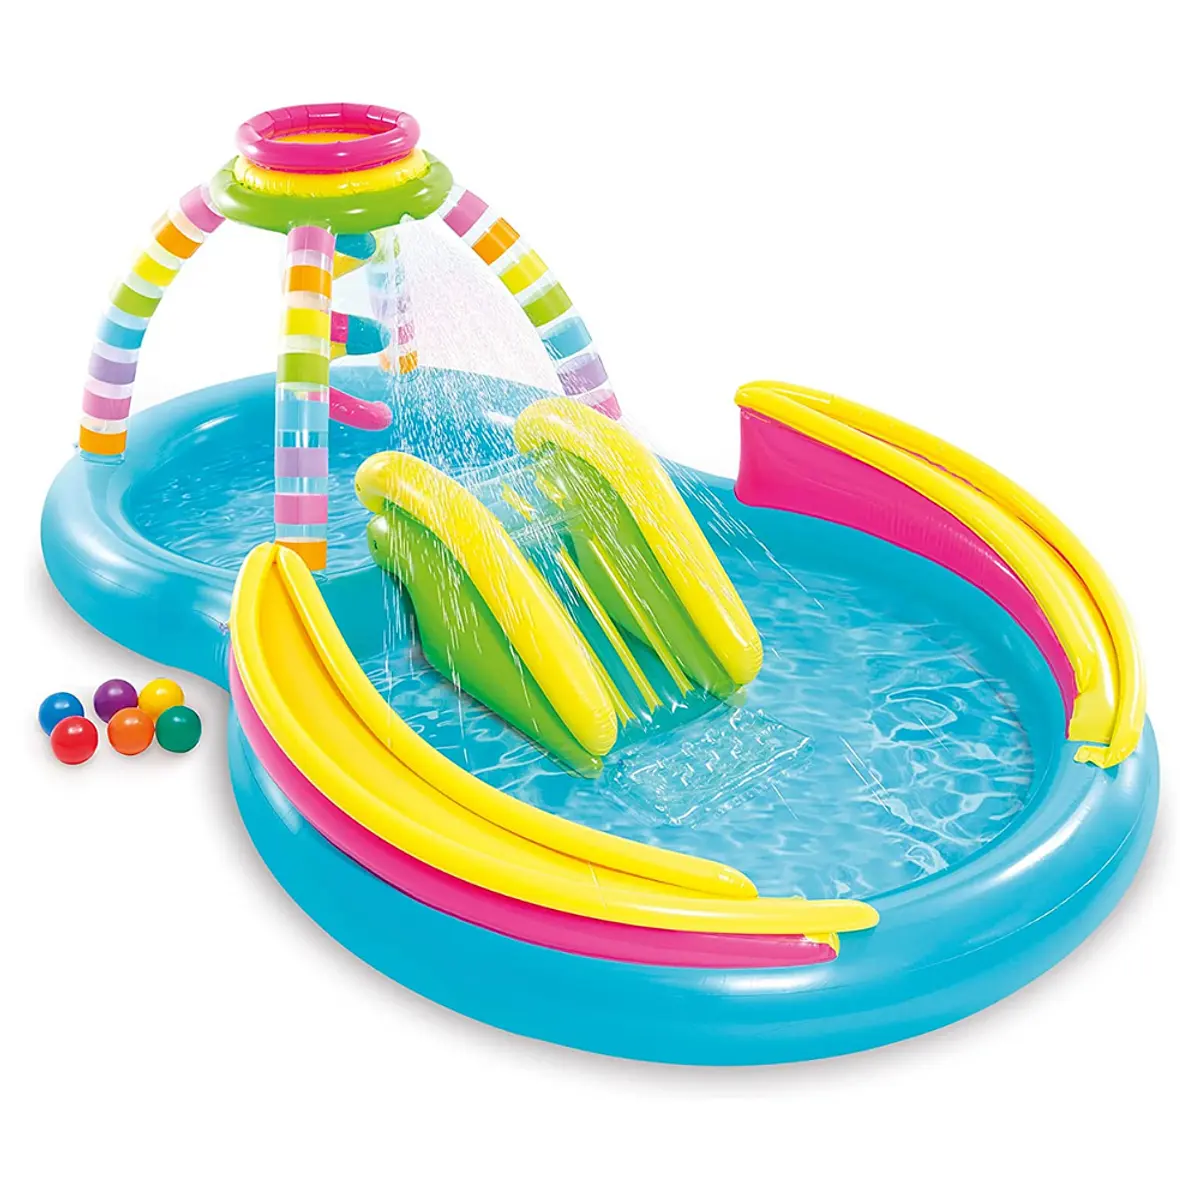 INTEX Funnel Rainbow Play Centre Pool For Kids With Six Balls